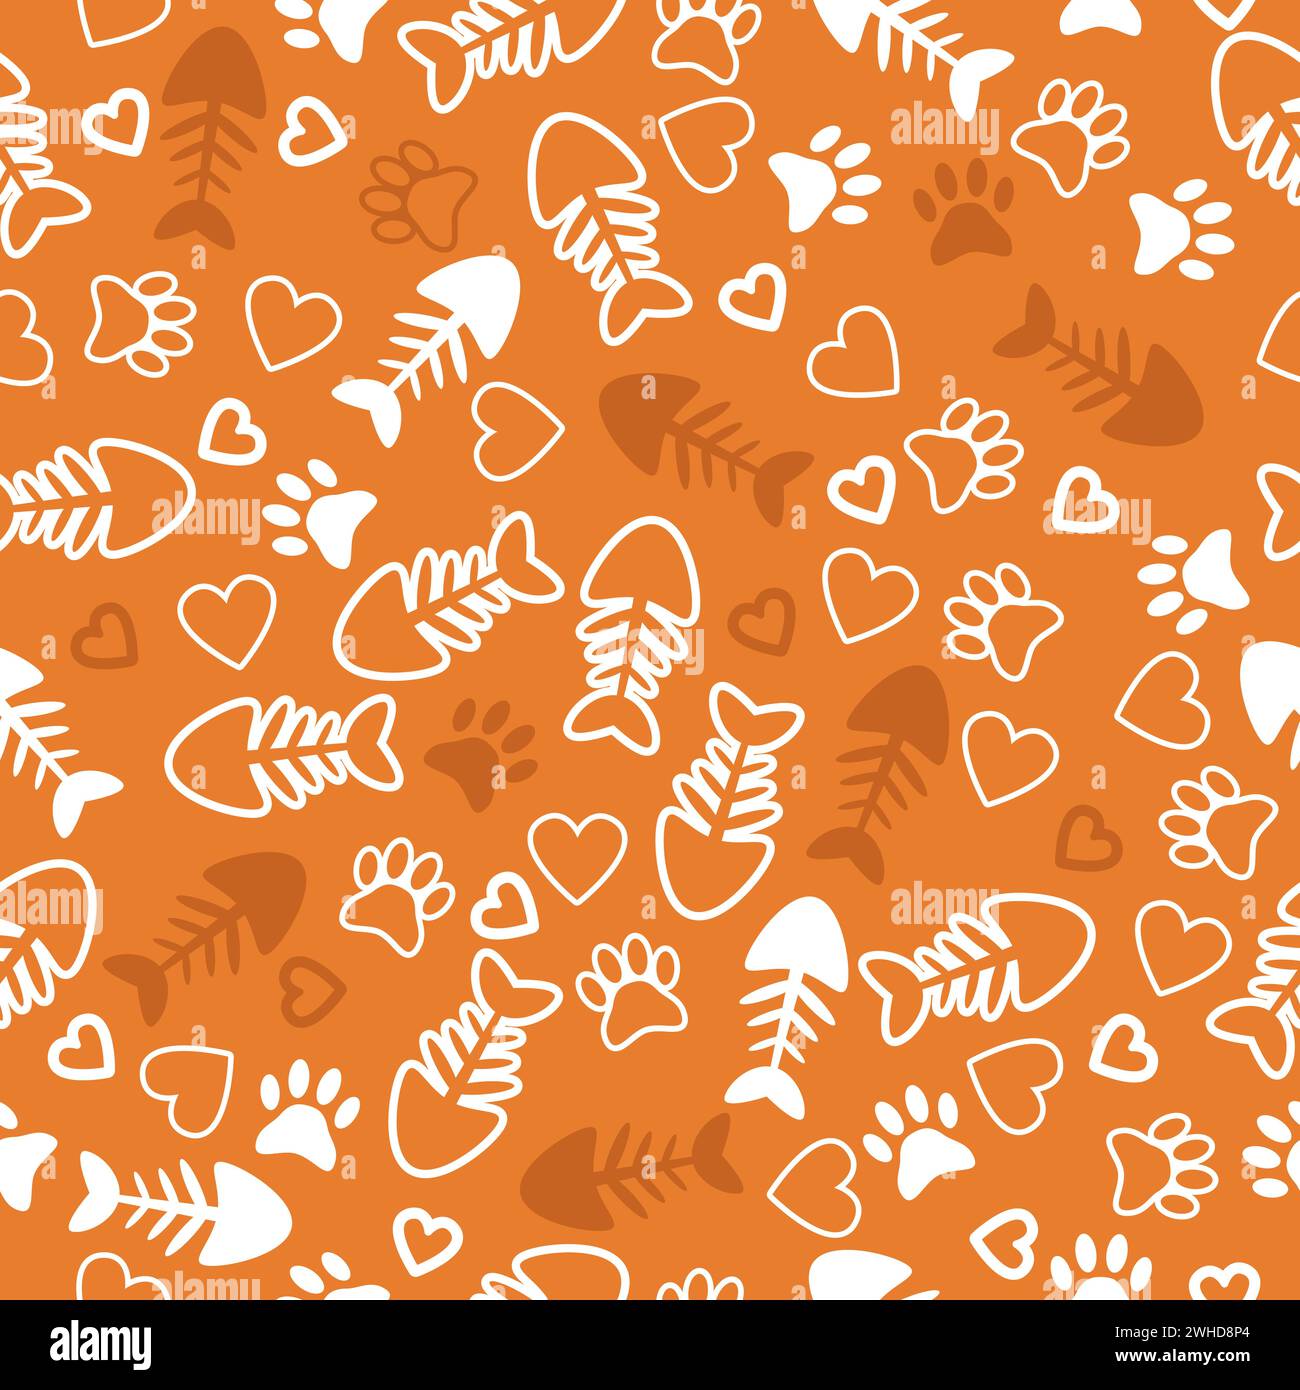 Seamless pattern with cat paw prints, fish bone and hearts. Orange background. Vector illustration Stock Vector